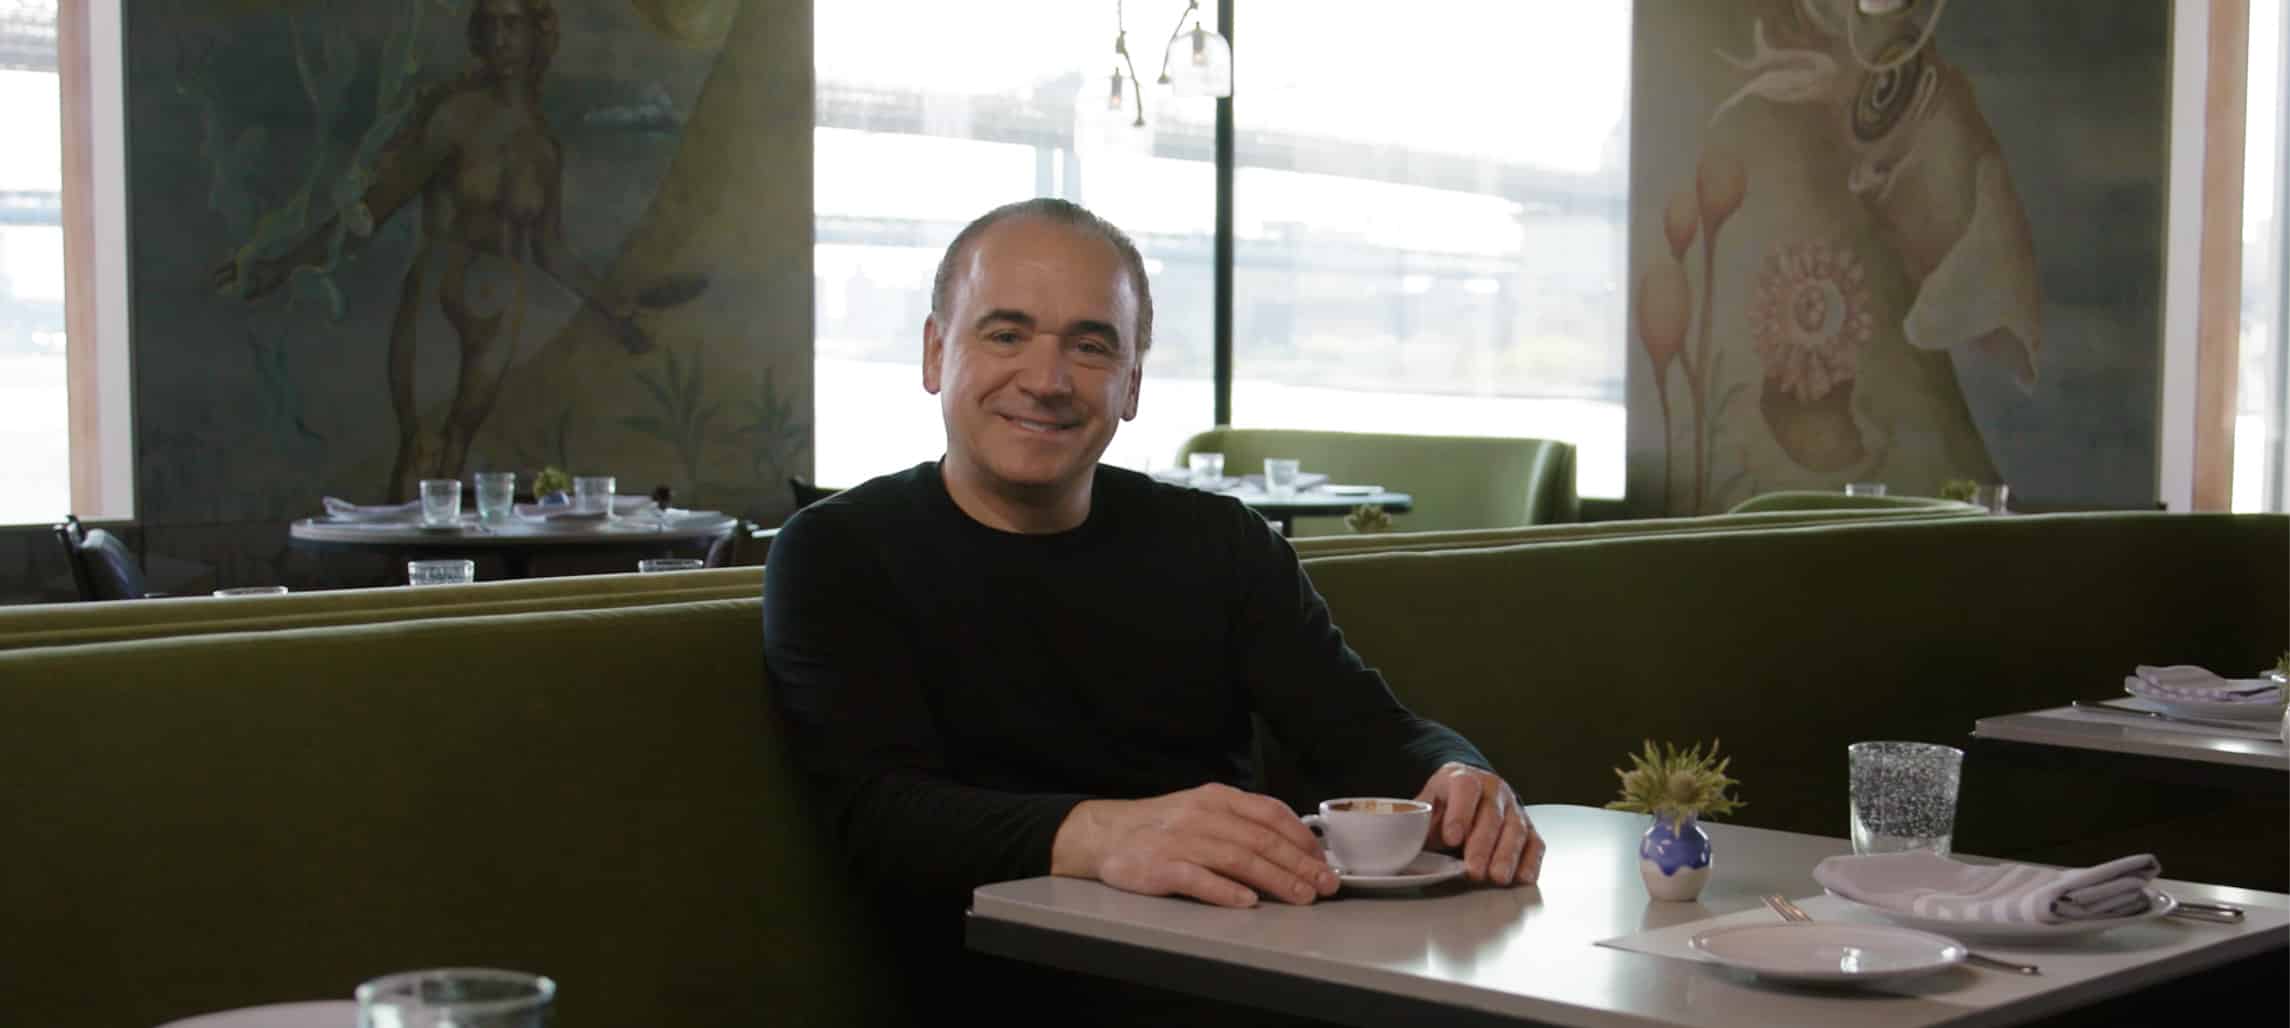 Chatting with Jean-Georges